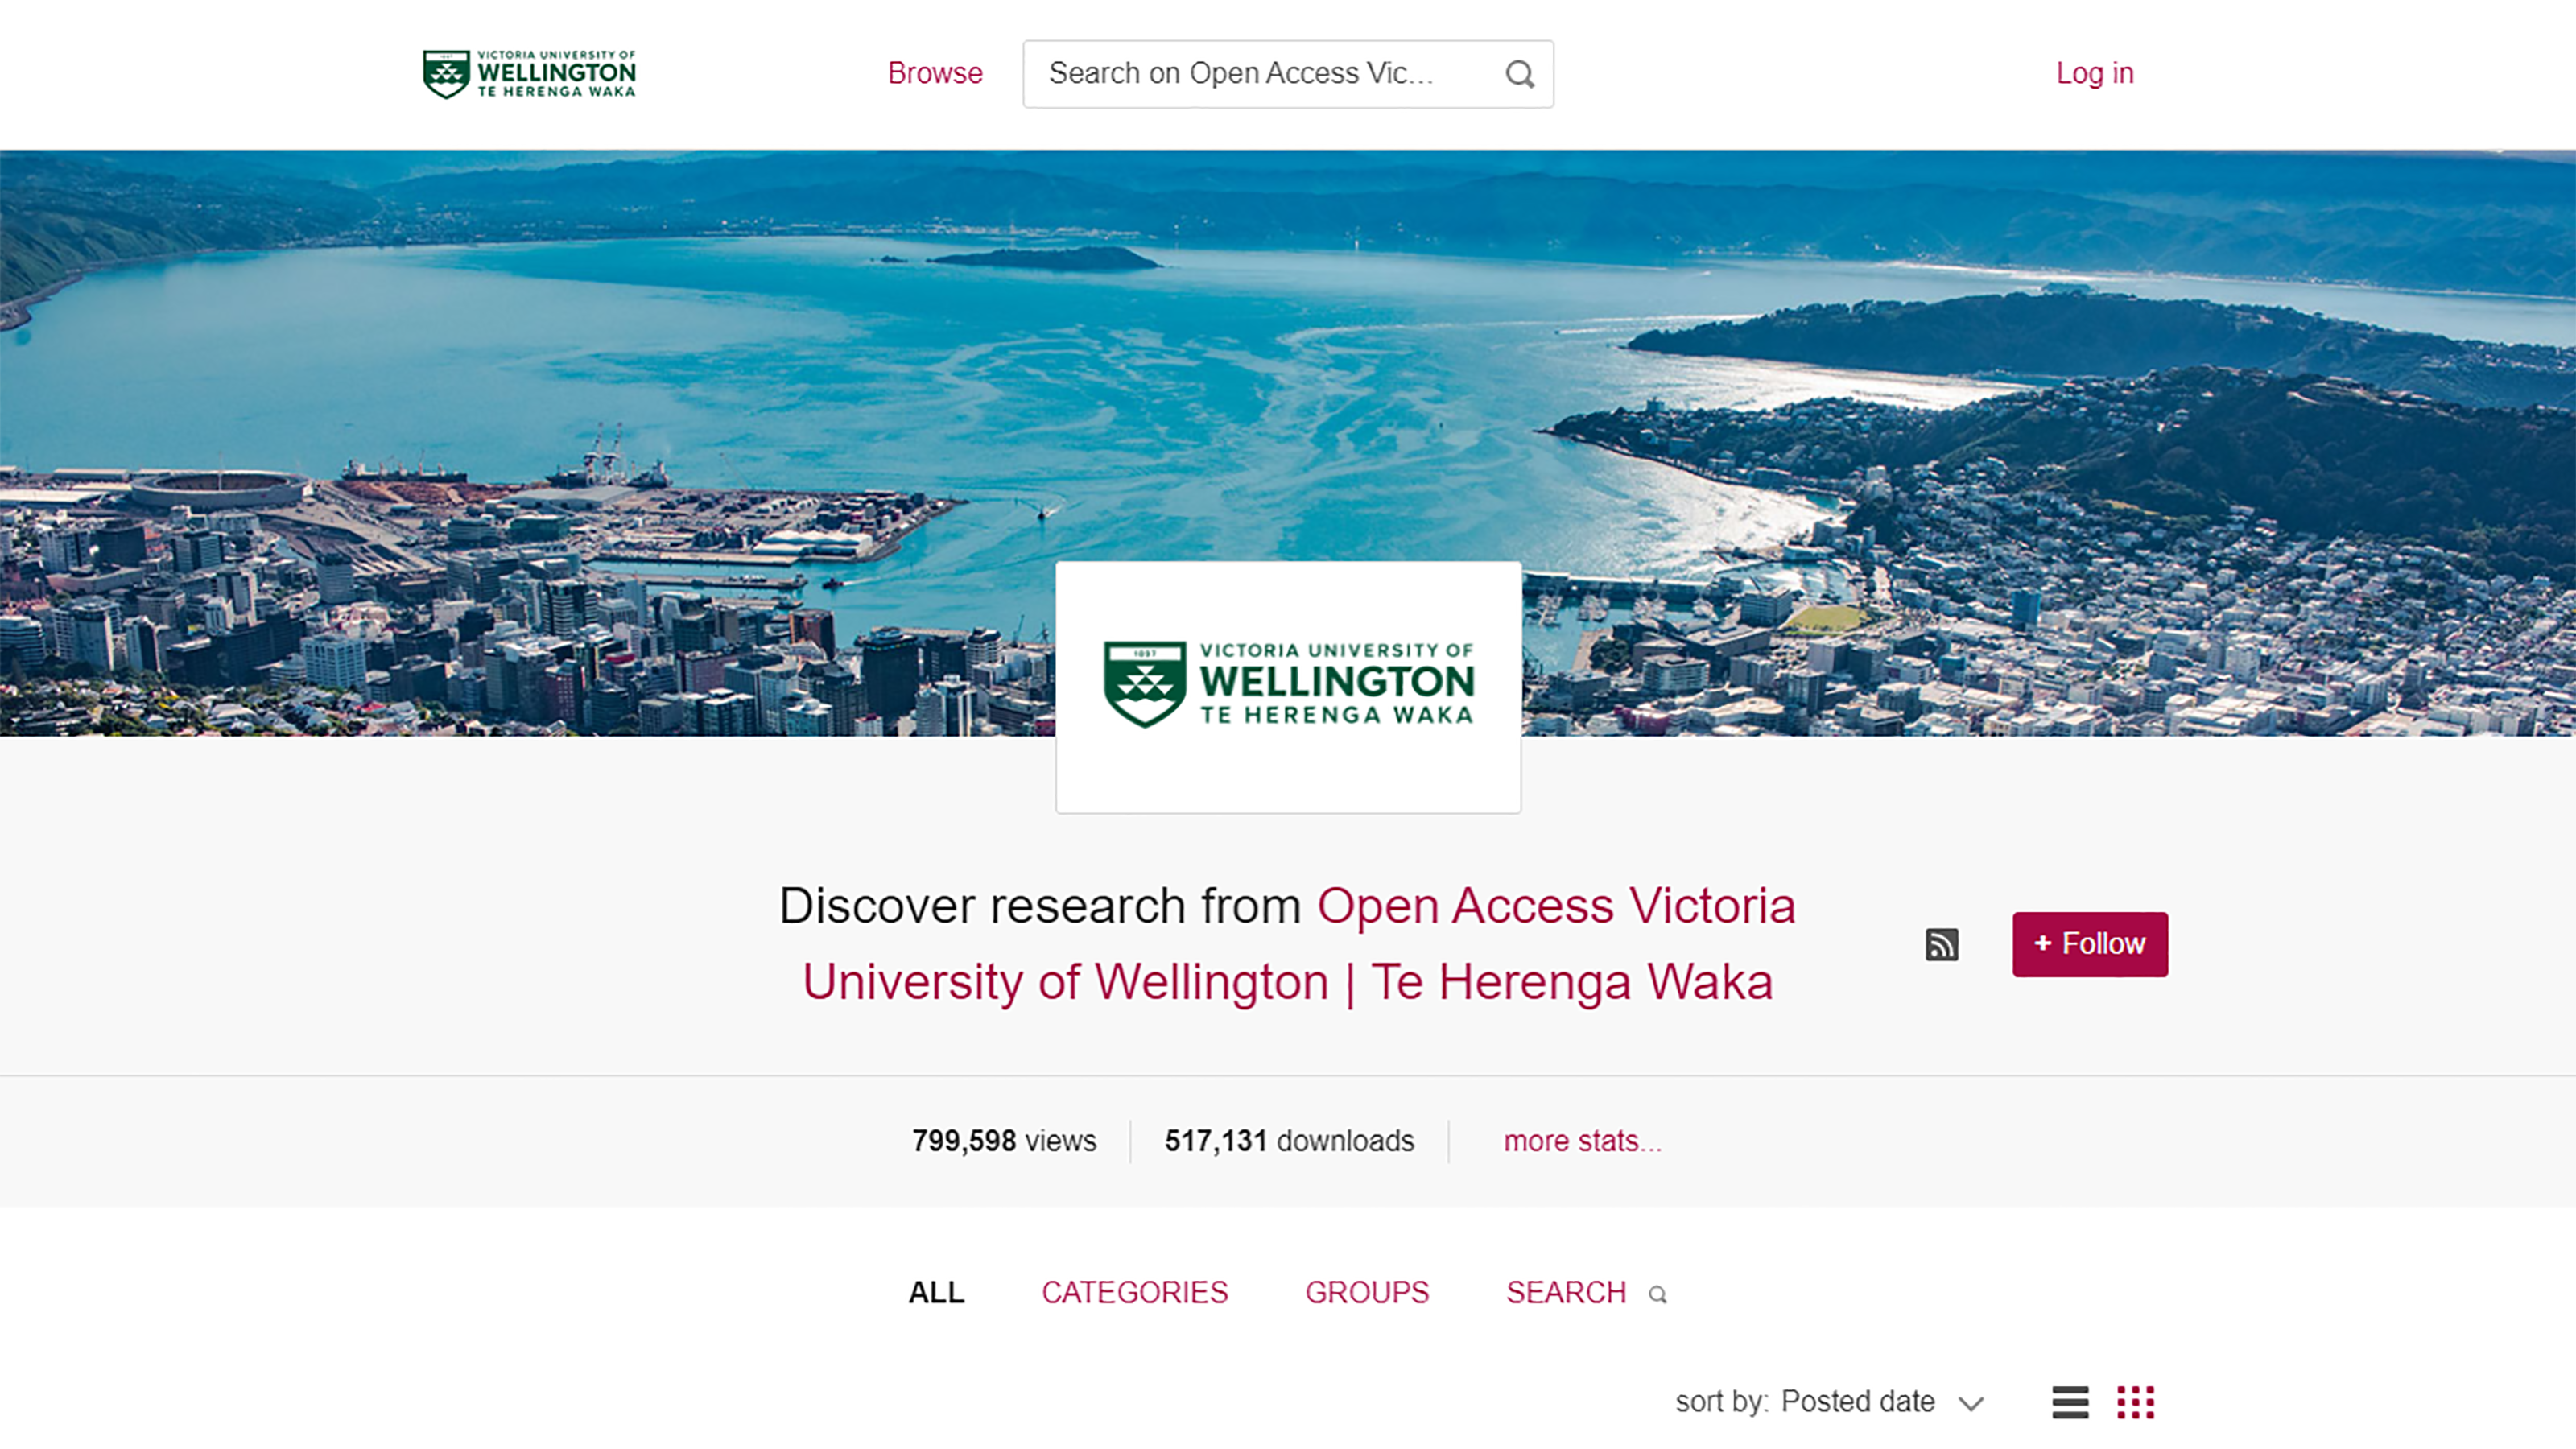 Screen shot of the home page of Open Access Victoria University of Wellingon